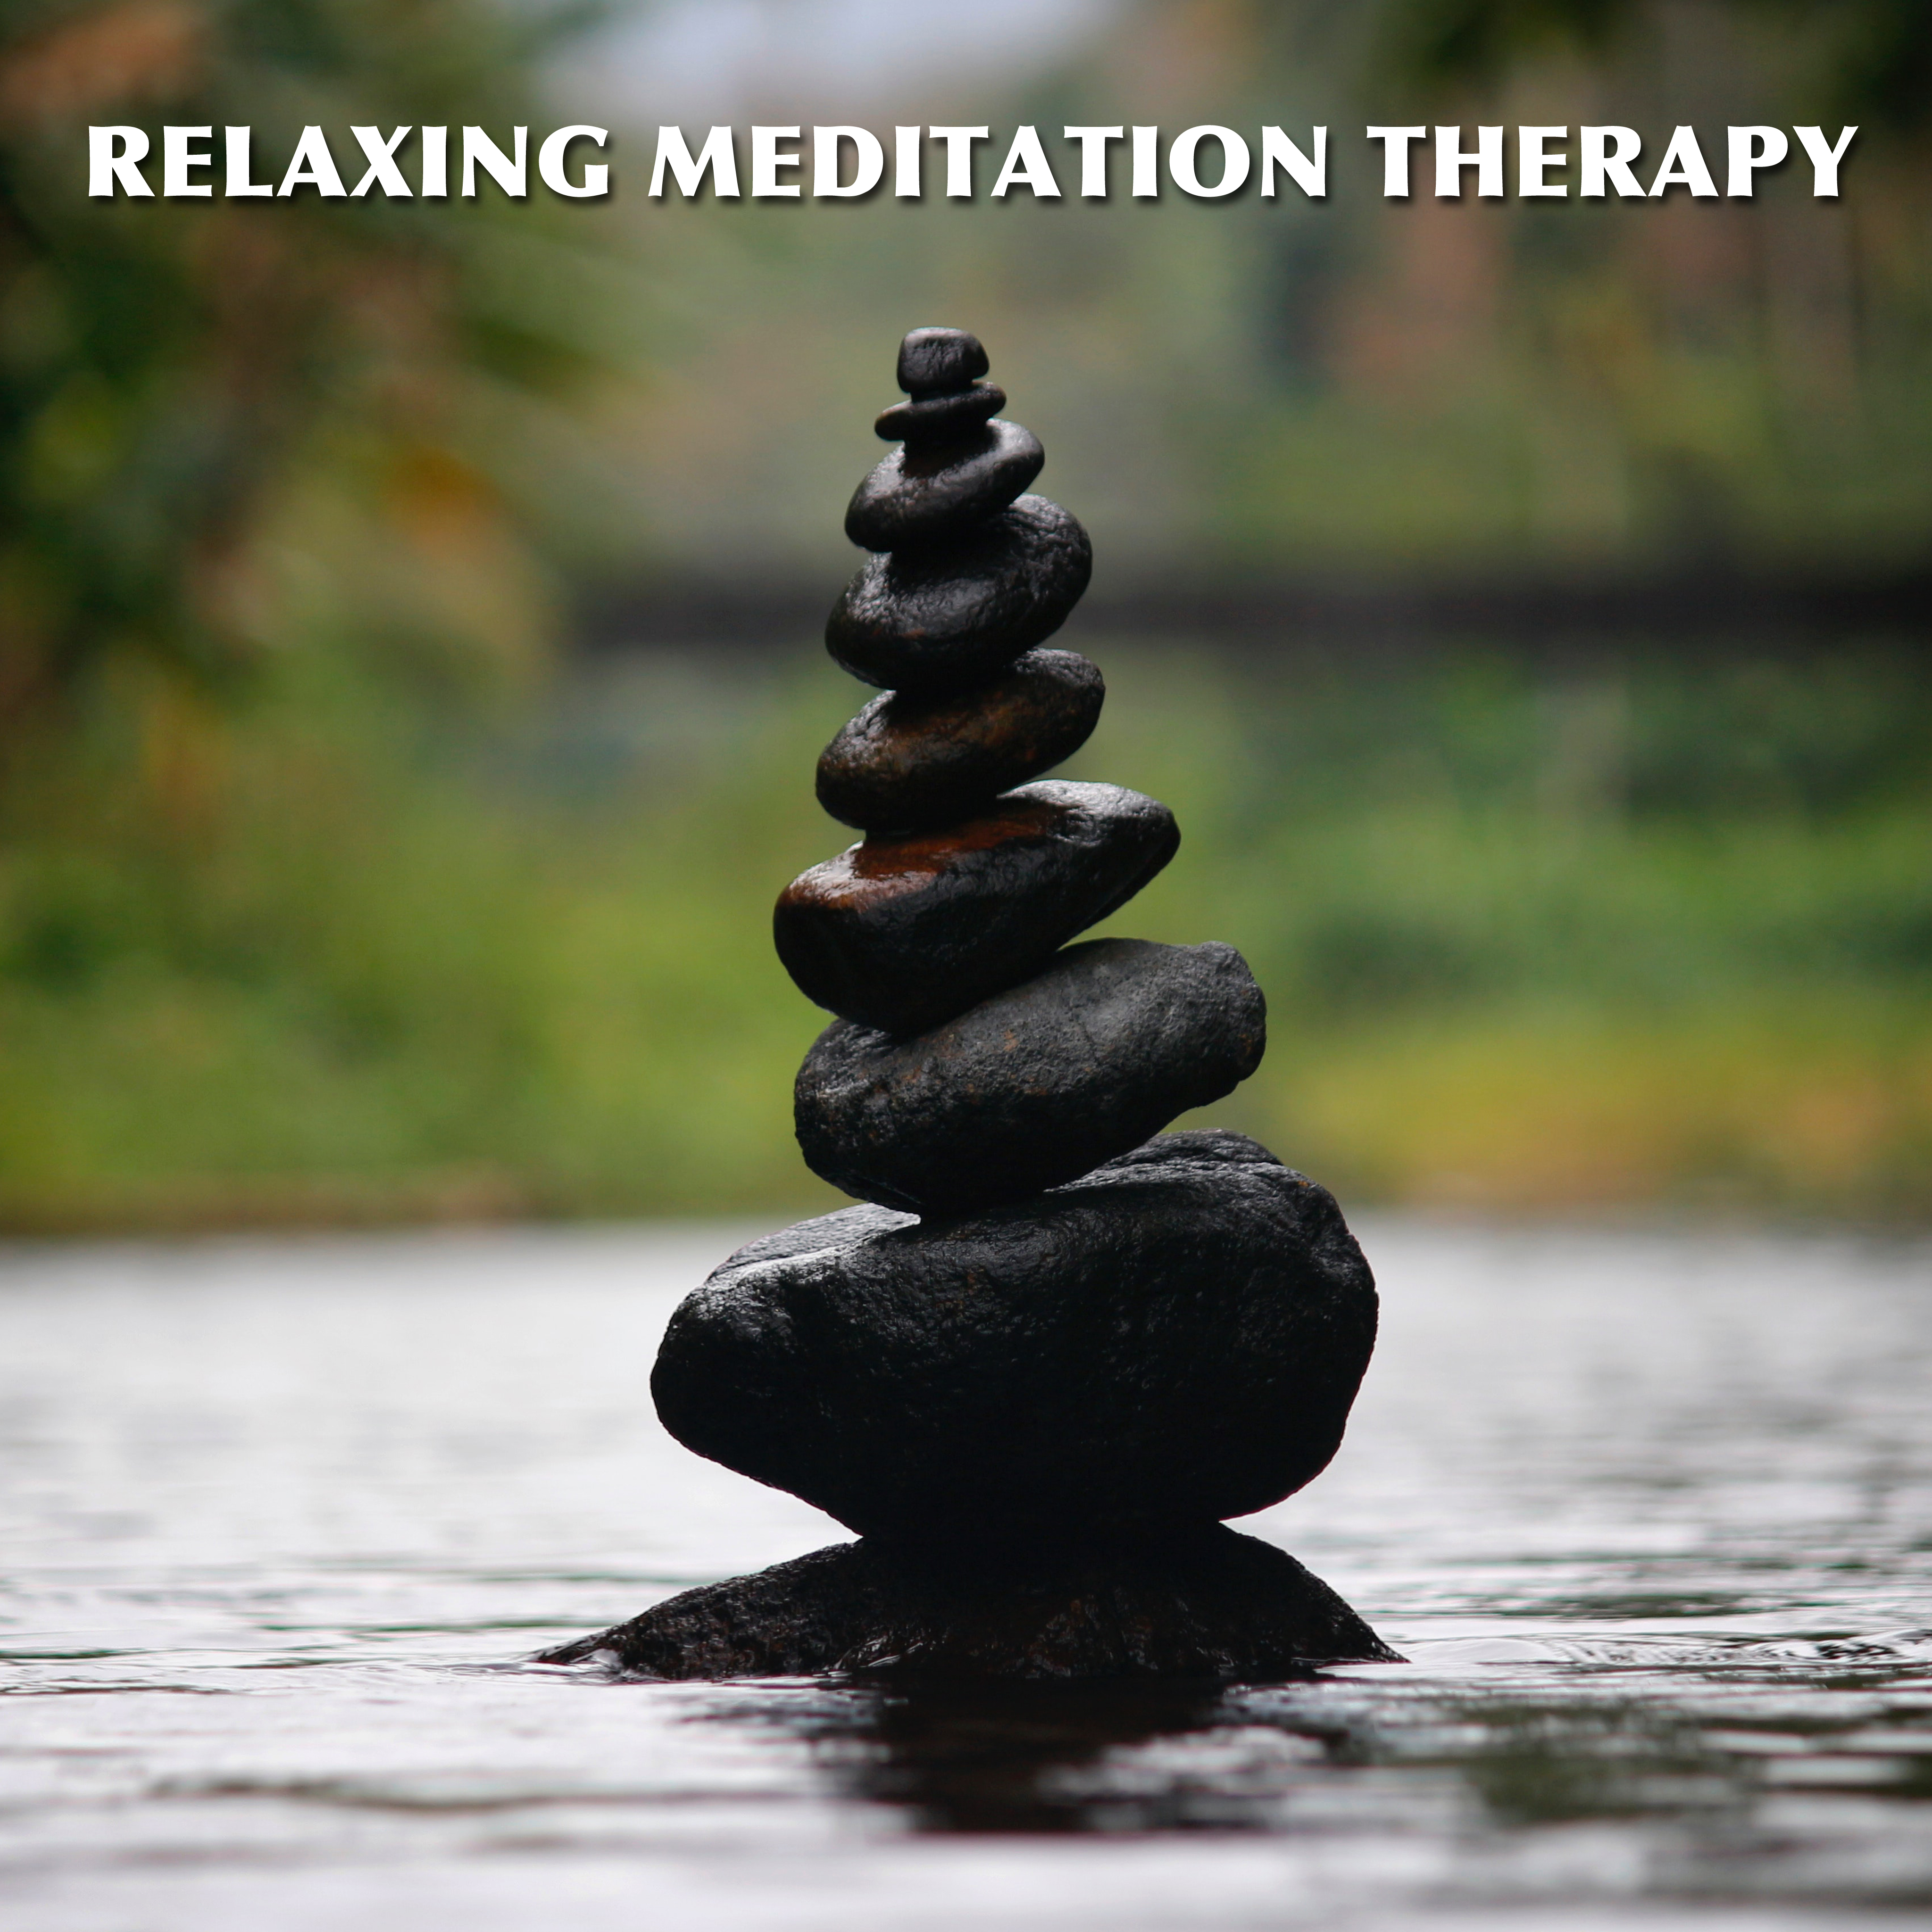 14 Sounds for Relaxing Meditation Therapy